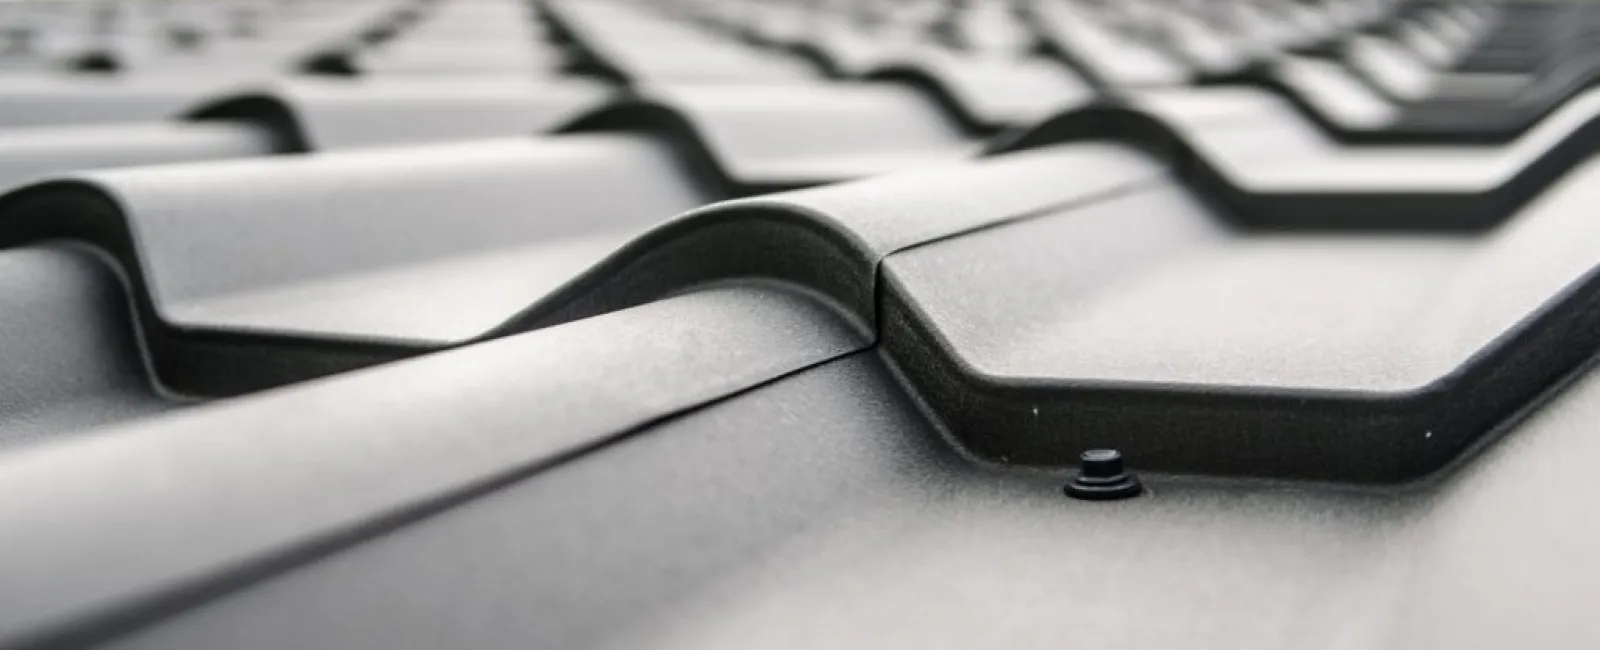 Ways to Maintain Your Metal Roofing and Prolong Its Life